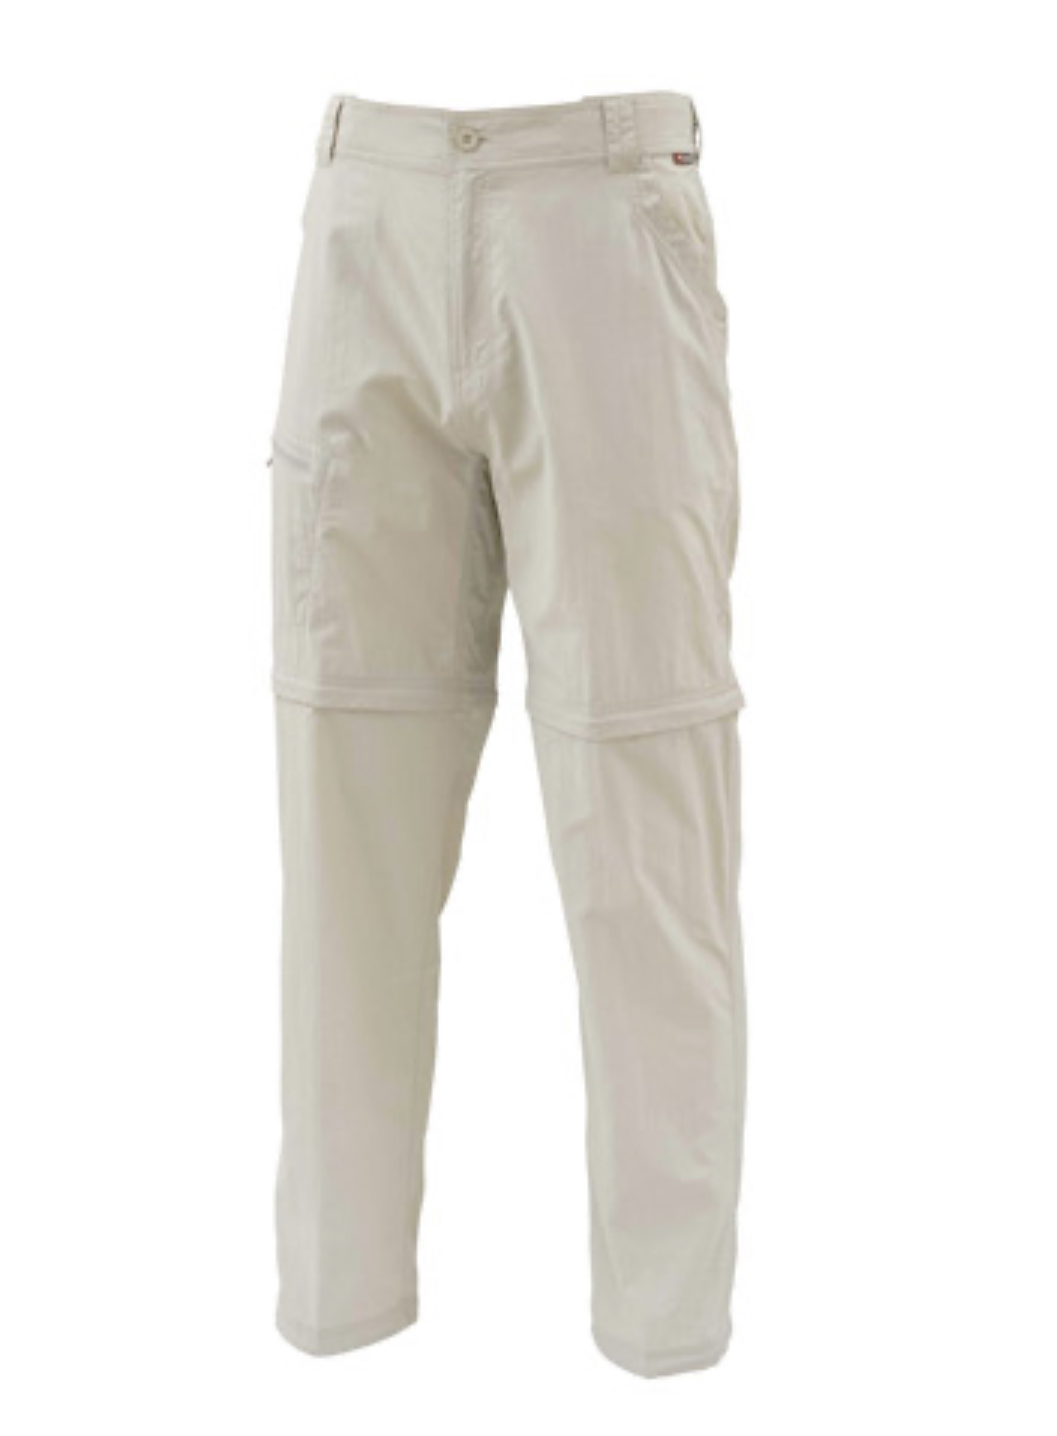 Simms M's Superlight Zip-Off Pants - Oyster - Large (36